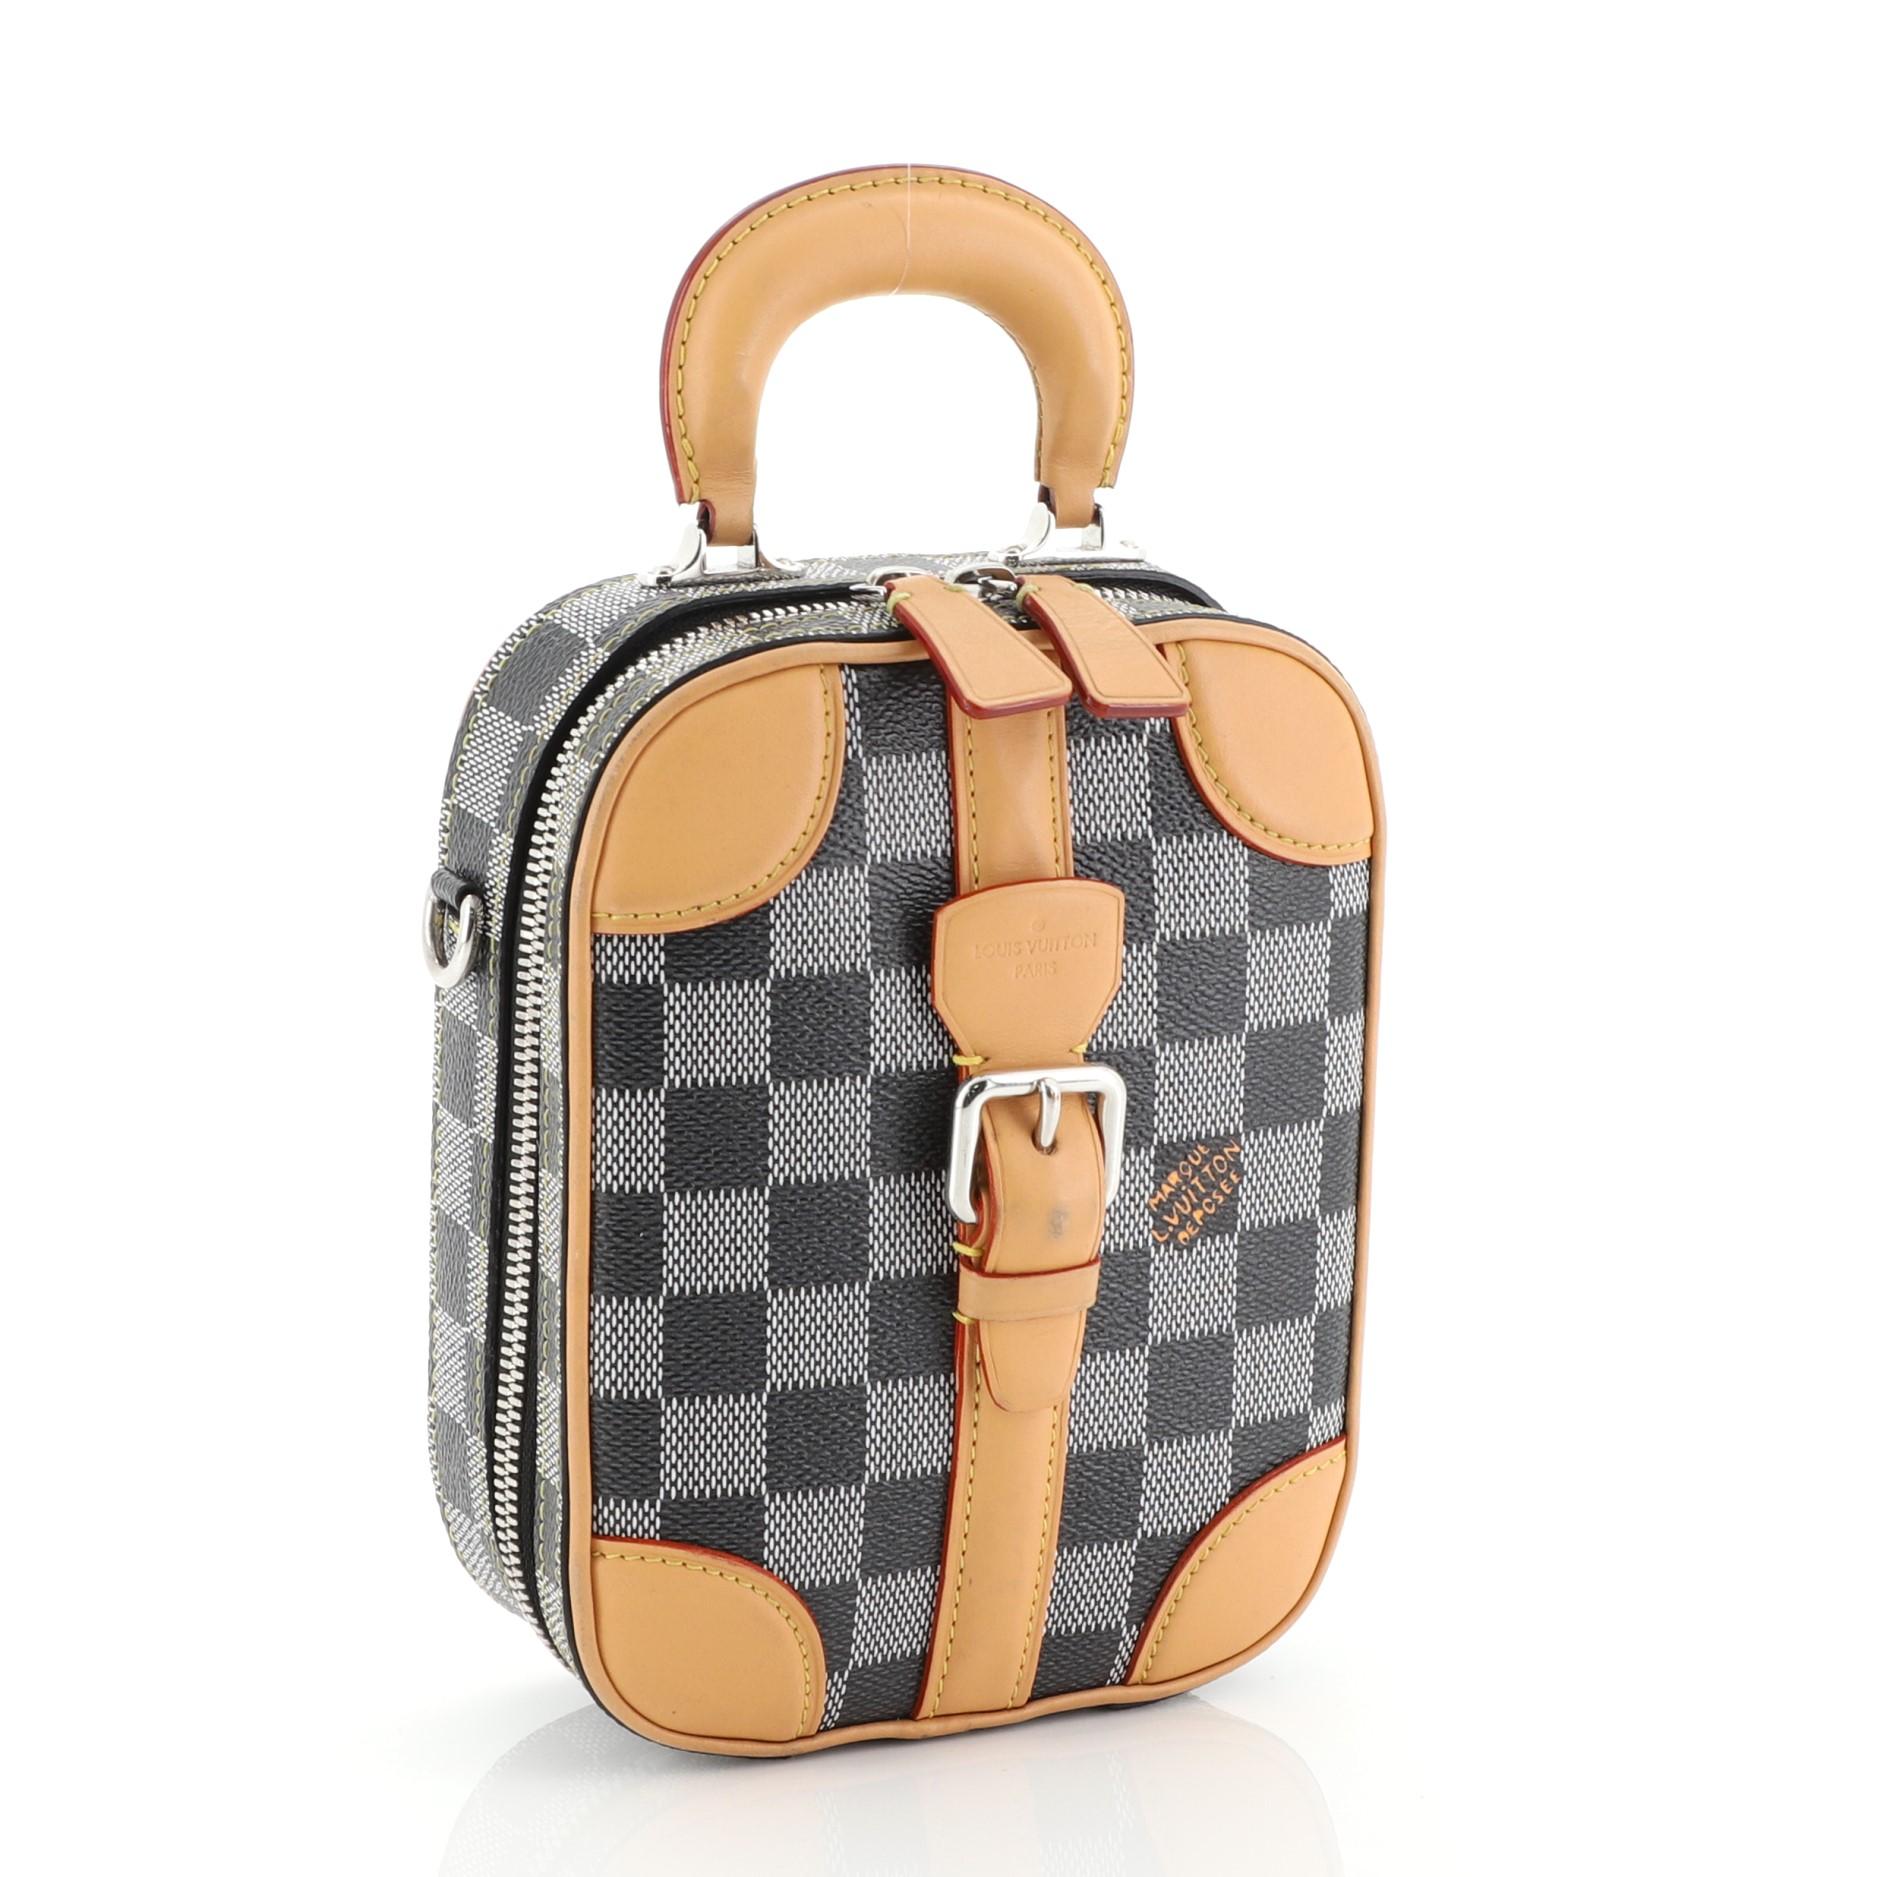 This Louis Vuitton Mini Luggage Vertical Limited Edition Colored Damier, crafted in blue Damier coated canvas, features a rigid handle, adjustable leather strap, metallic buckle and silver-tone hardware. Its zip closure opens to a brown microfiber